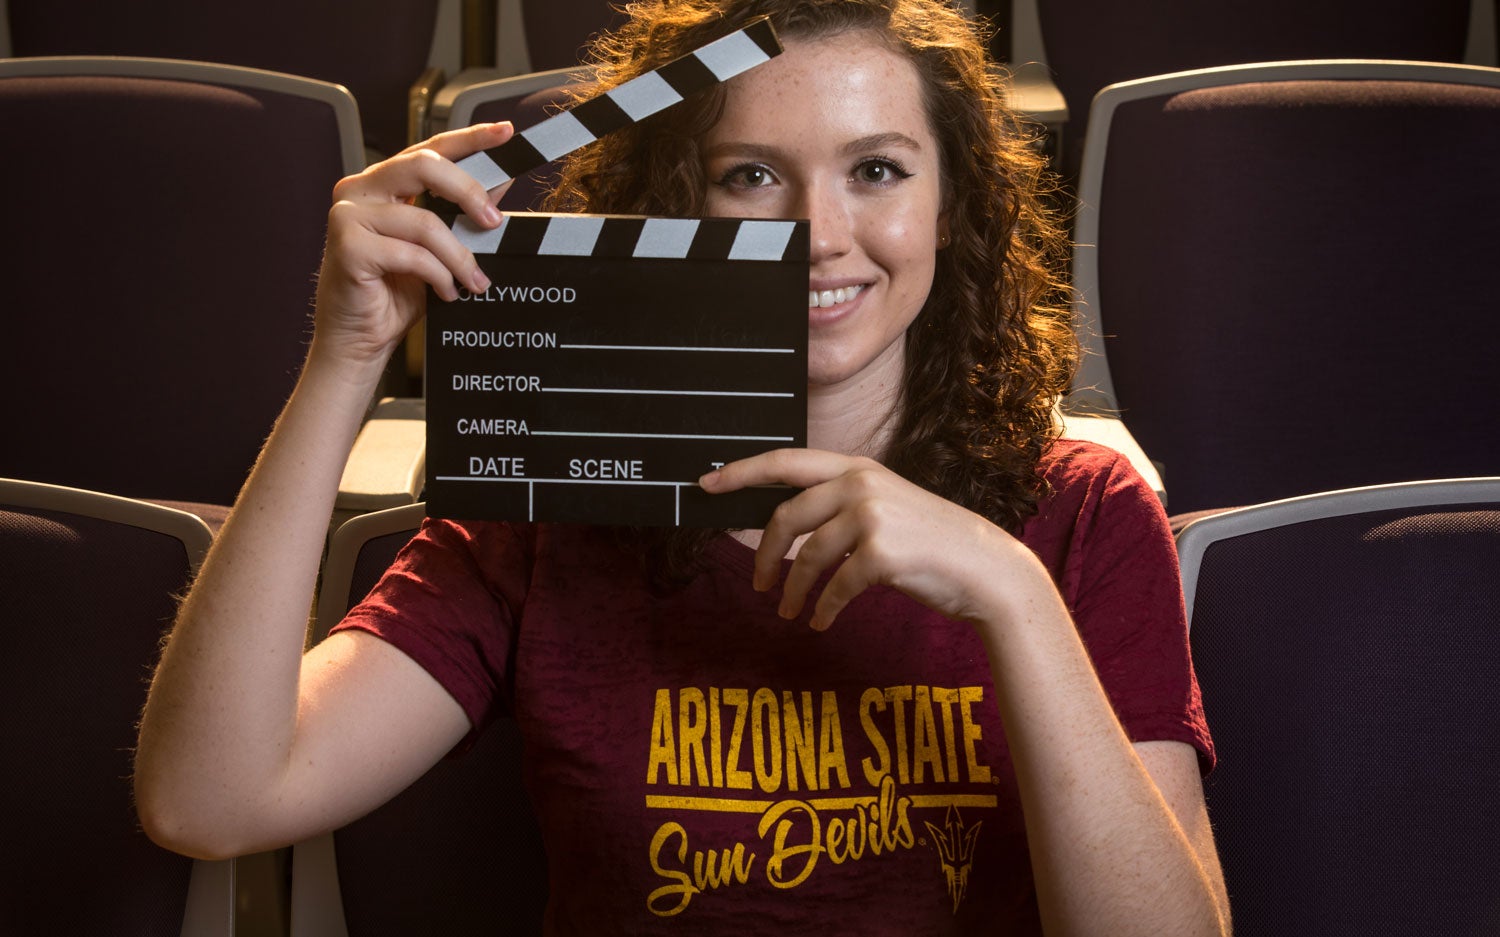 A woman wearing an ASU shirt smiles at the camera while holding a film clapperboard / Credit ASU Online